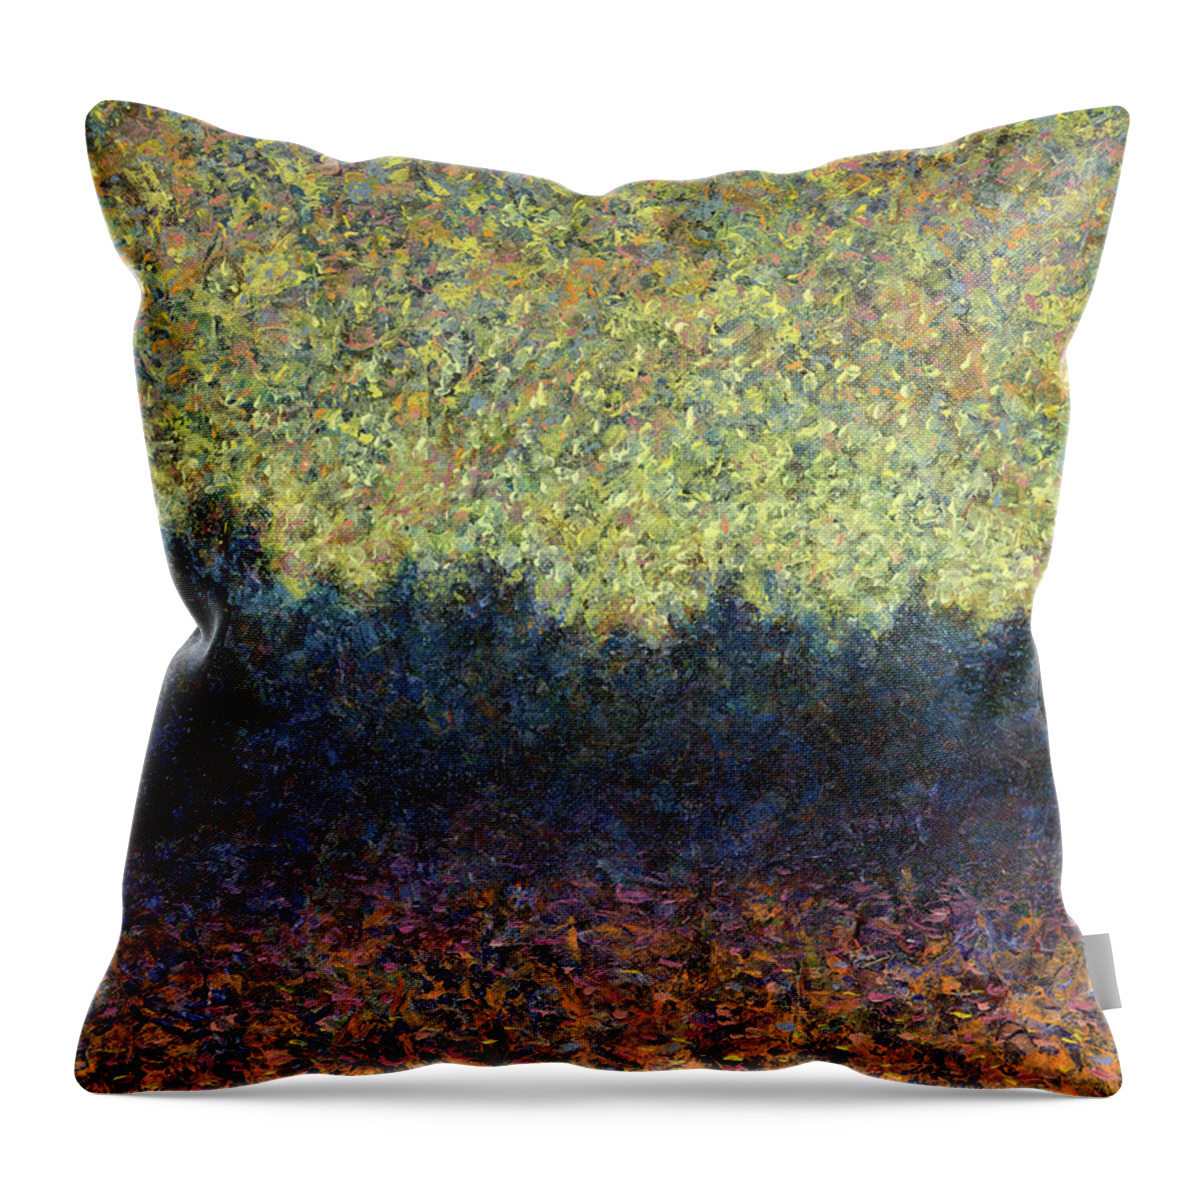 Lakeshore Throw Pillow featuring the painting Lakeshore Sunset by James W Johnson